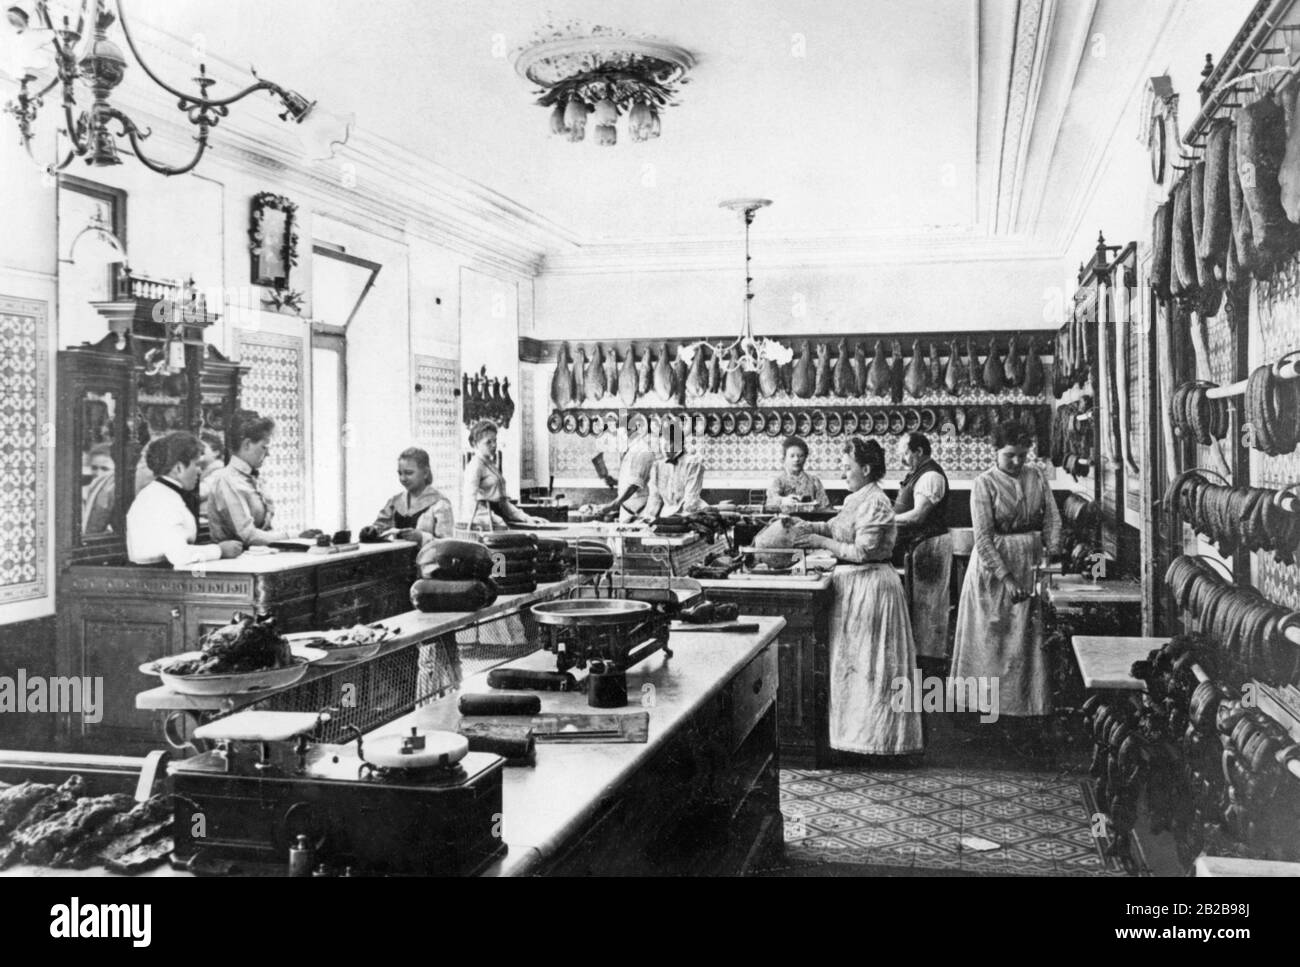 A butcher's shop that was considered the most modern and newest retail store in Berlin at that time. Mostly women work there, left at the cash desk, right as sales assistants. Stock Photo